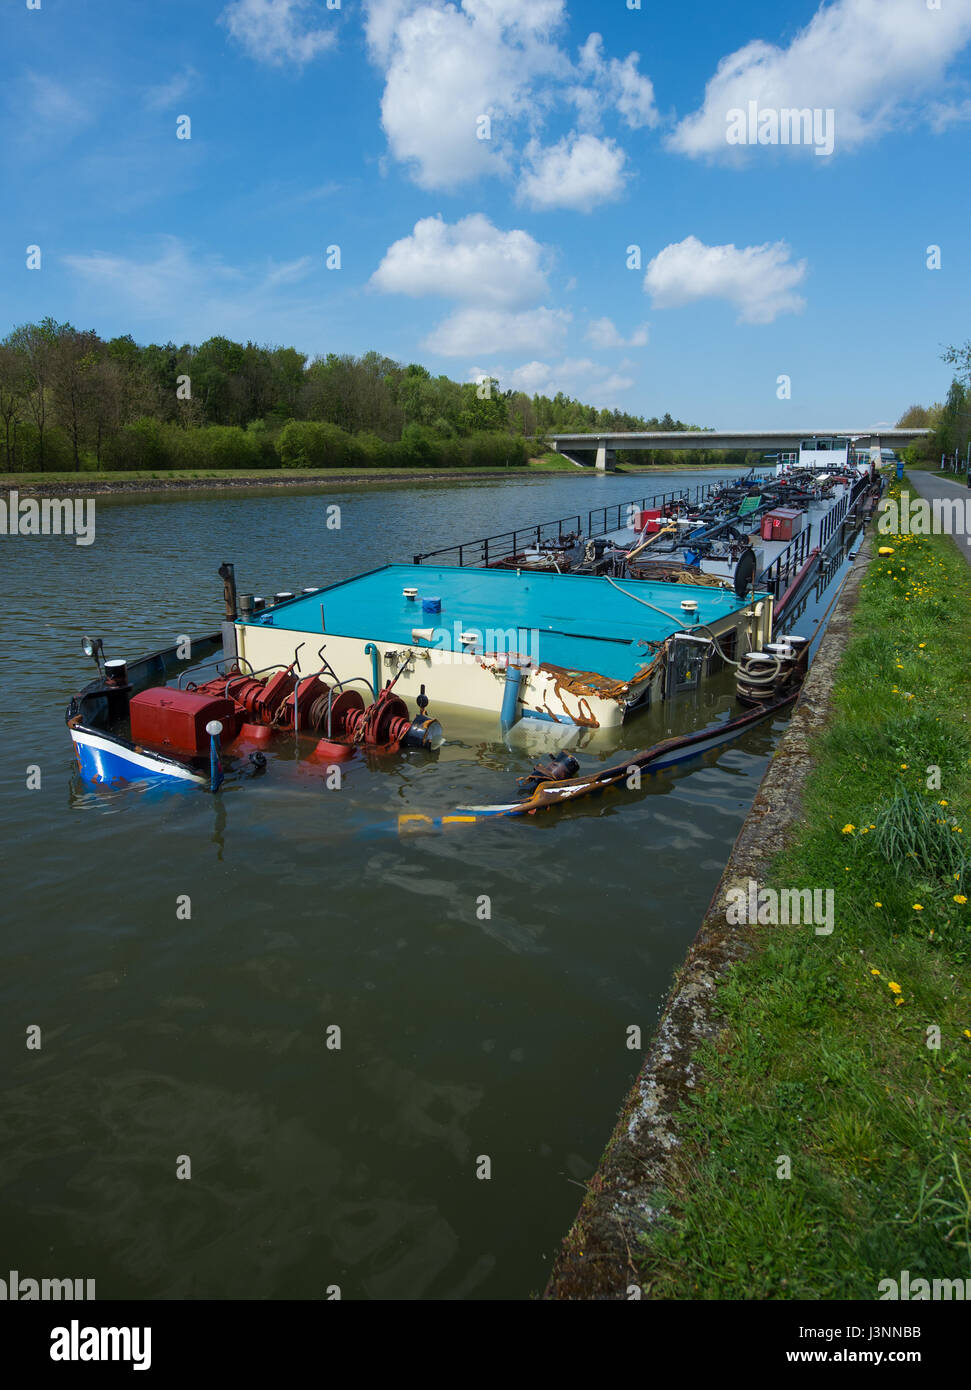 Bad Bodenteich, Germany. 7th May, 2017. A tankship fills up with water after a collision with another ship on a side canal of Elbe river in Bad Bodenteich, Germany, 7 May 2017. The two ships crashed into each other head-on. One of the ship sank half-way. Photo: Philipp Schulze/dpa/Alamy Live News Stock Photo